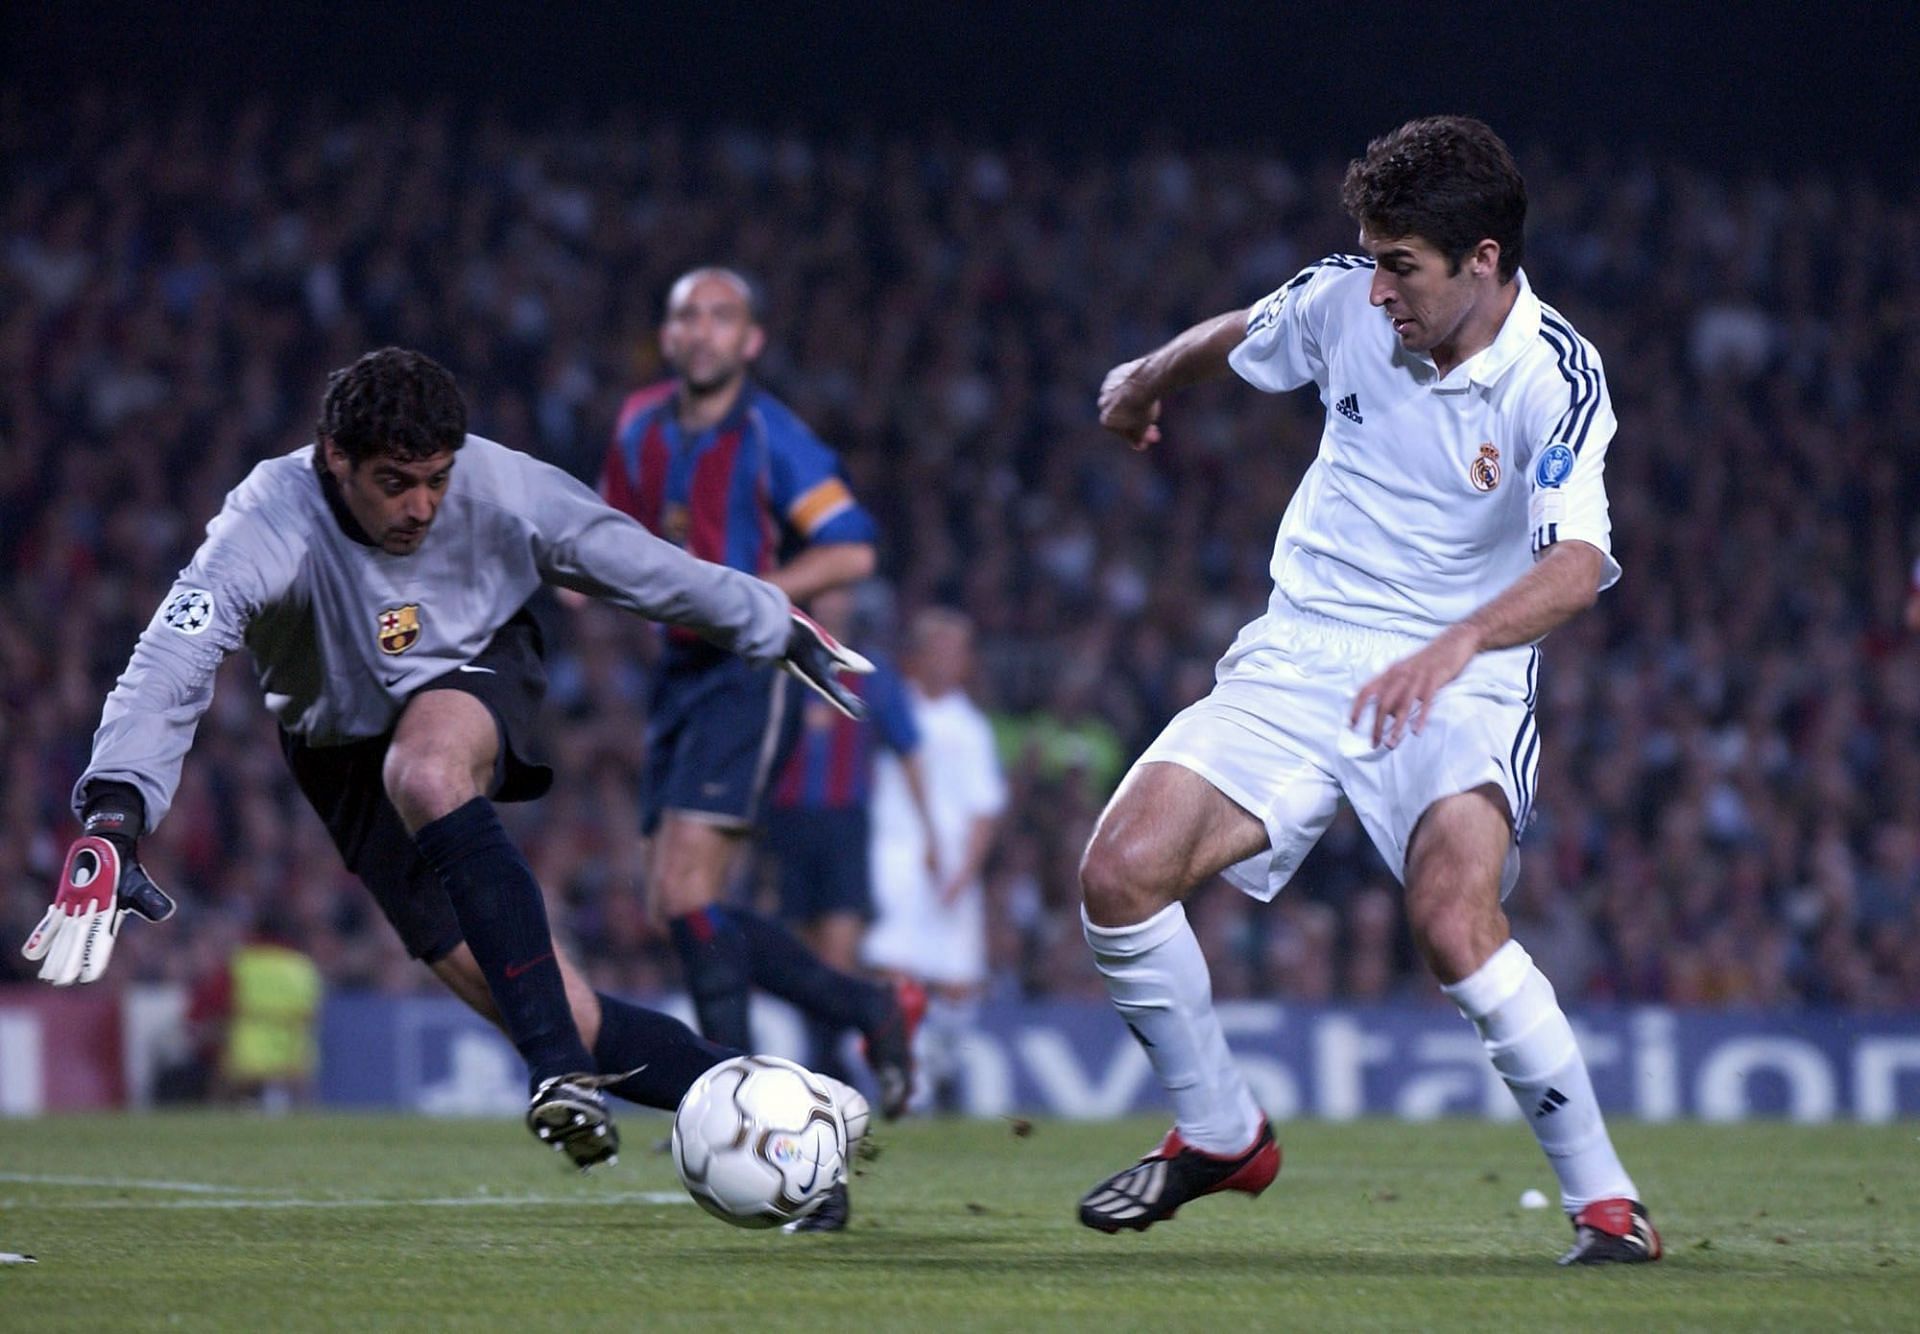 Barcelona v Real Madrid: Raul tries to round the keeper